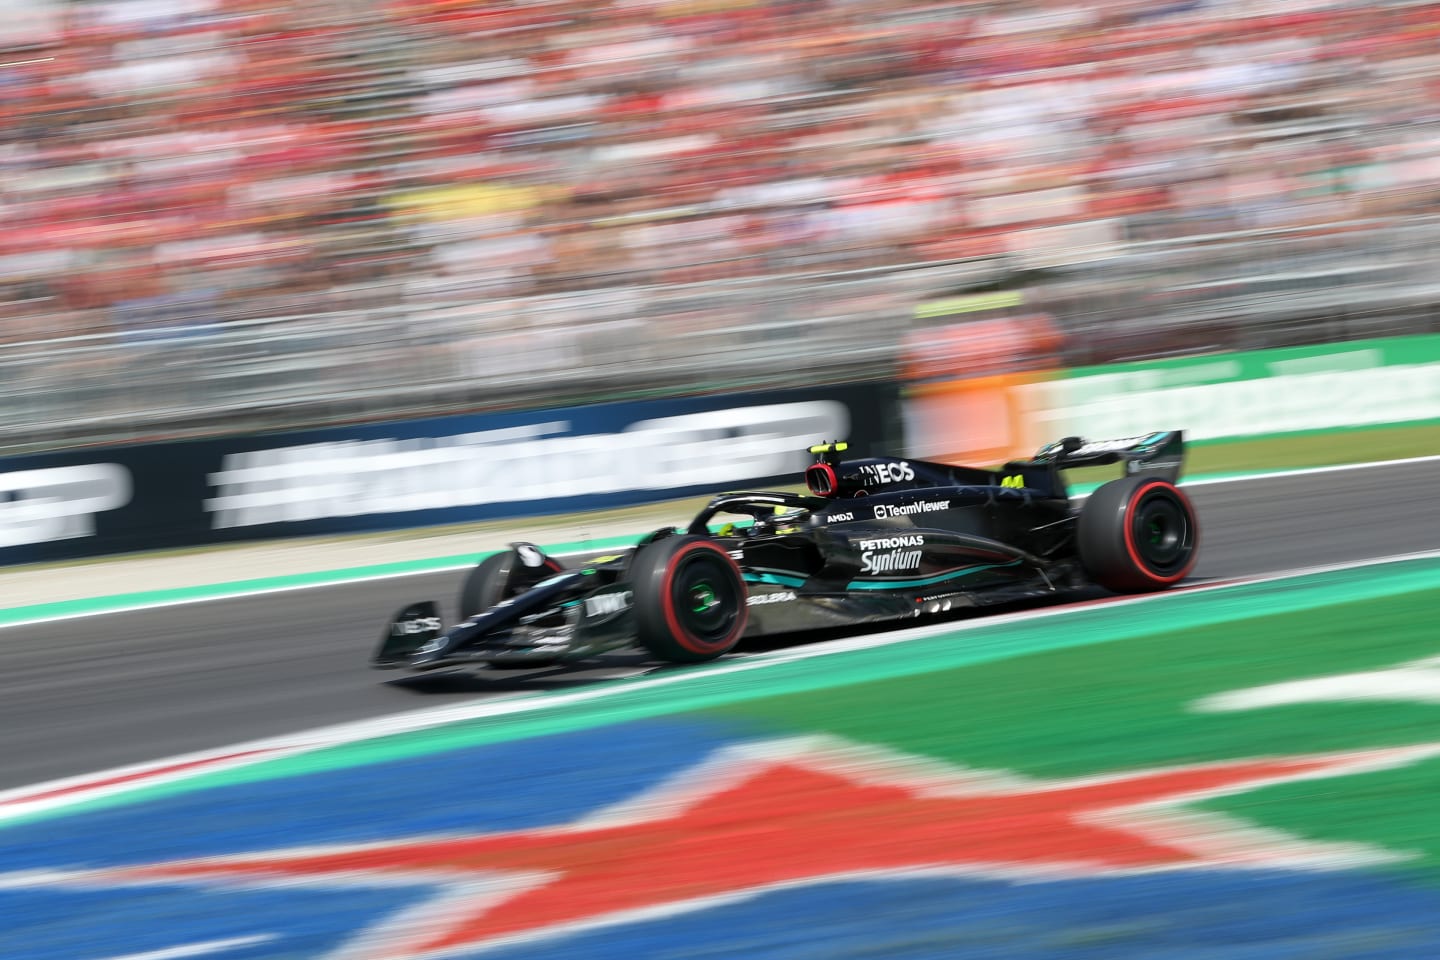 MONZA, ITALY - SEPTEMBER 02: Lewis Hamilton of Great Britain driving the (44) Mercedes AMG Petronas